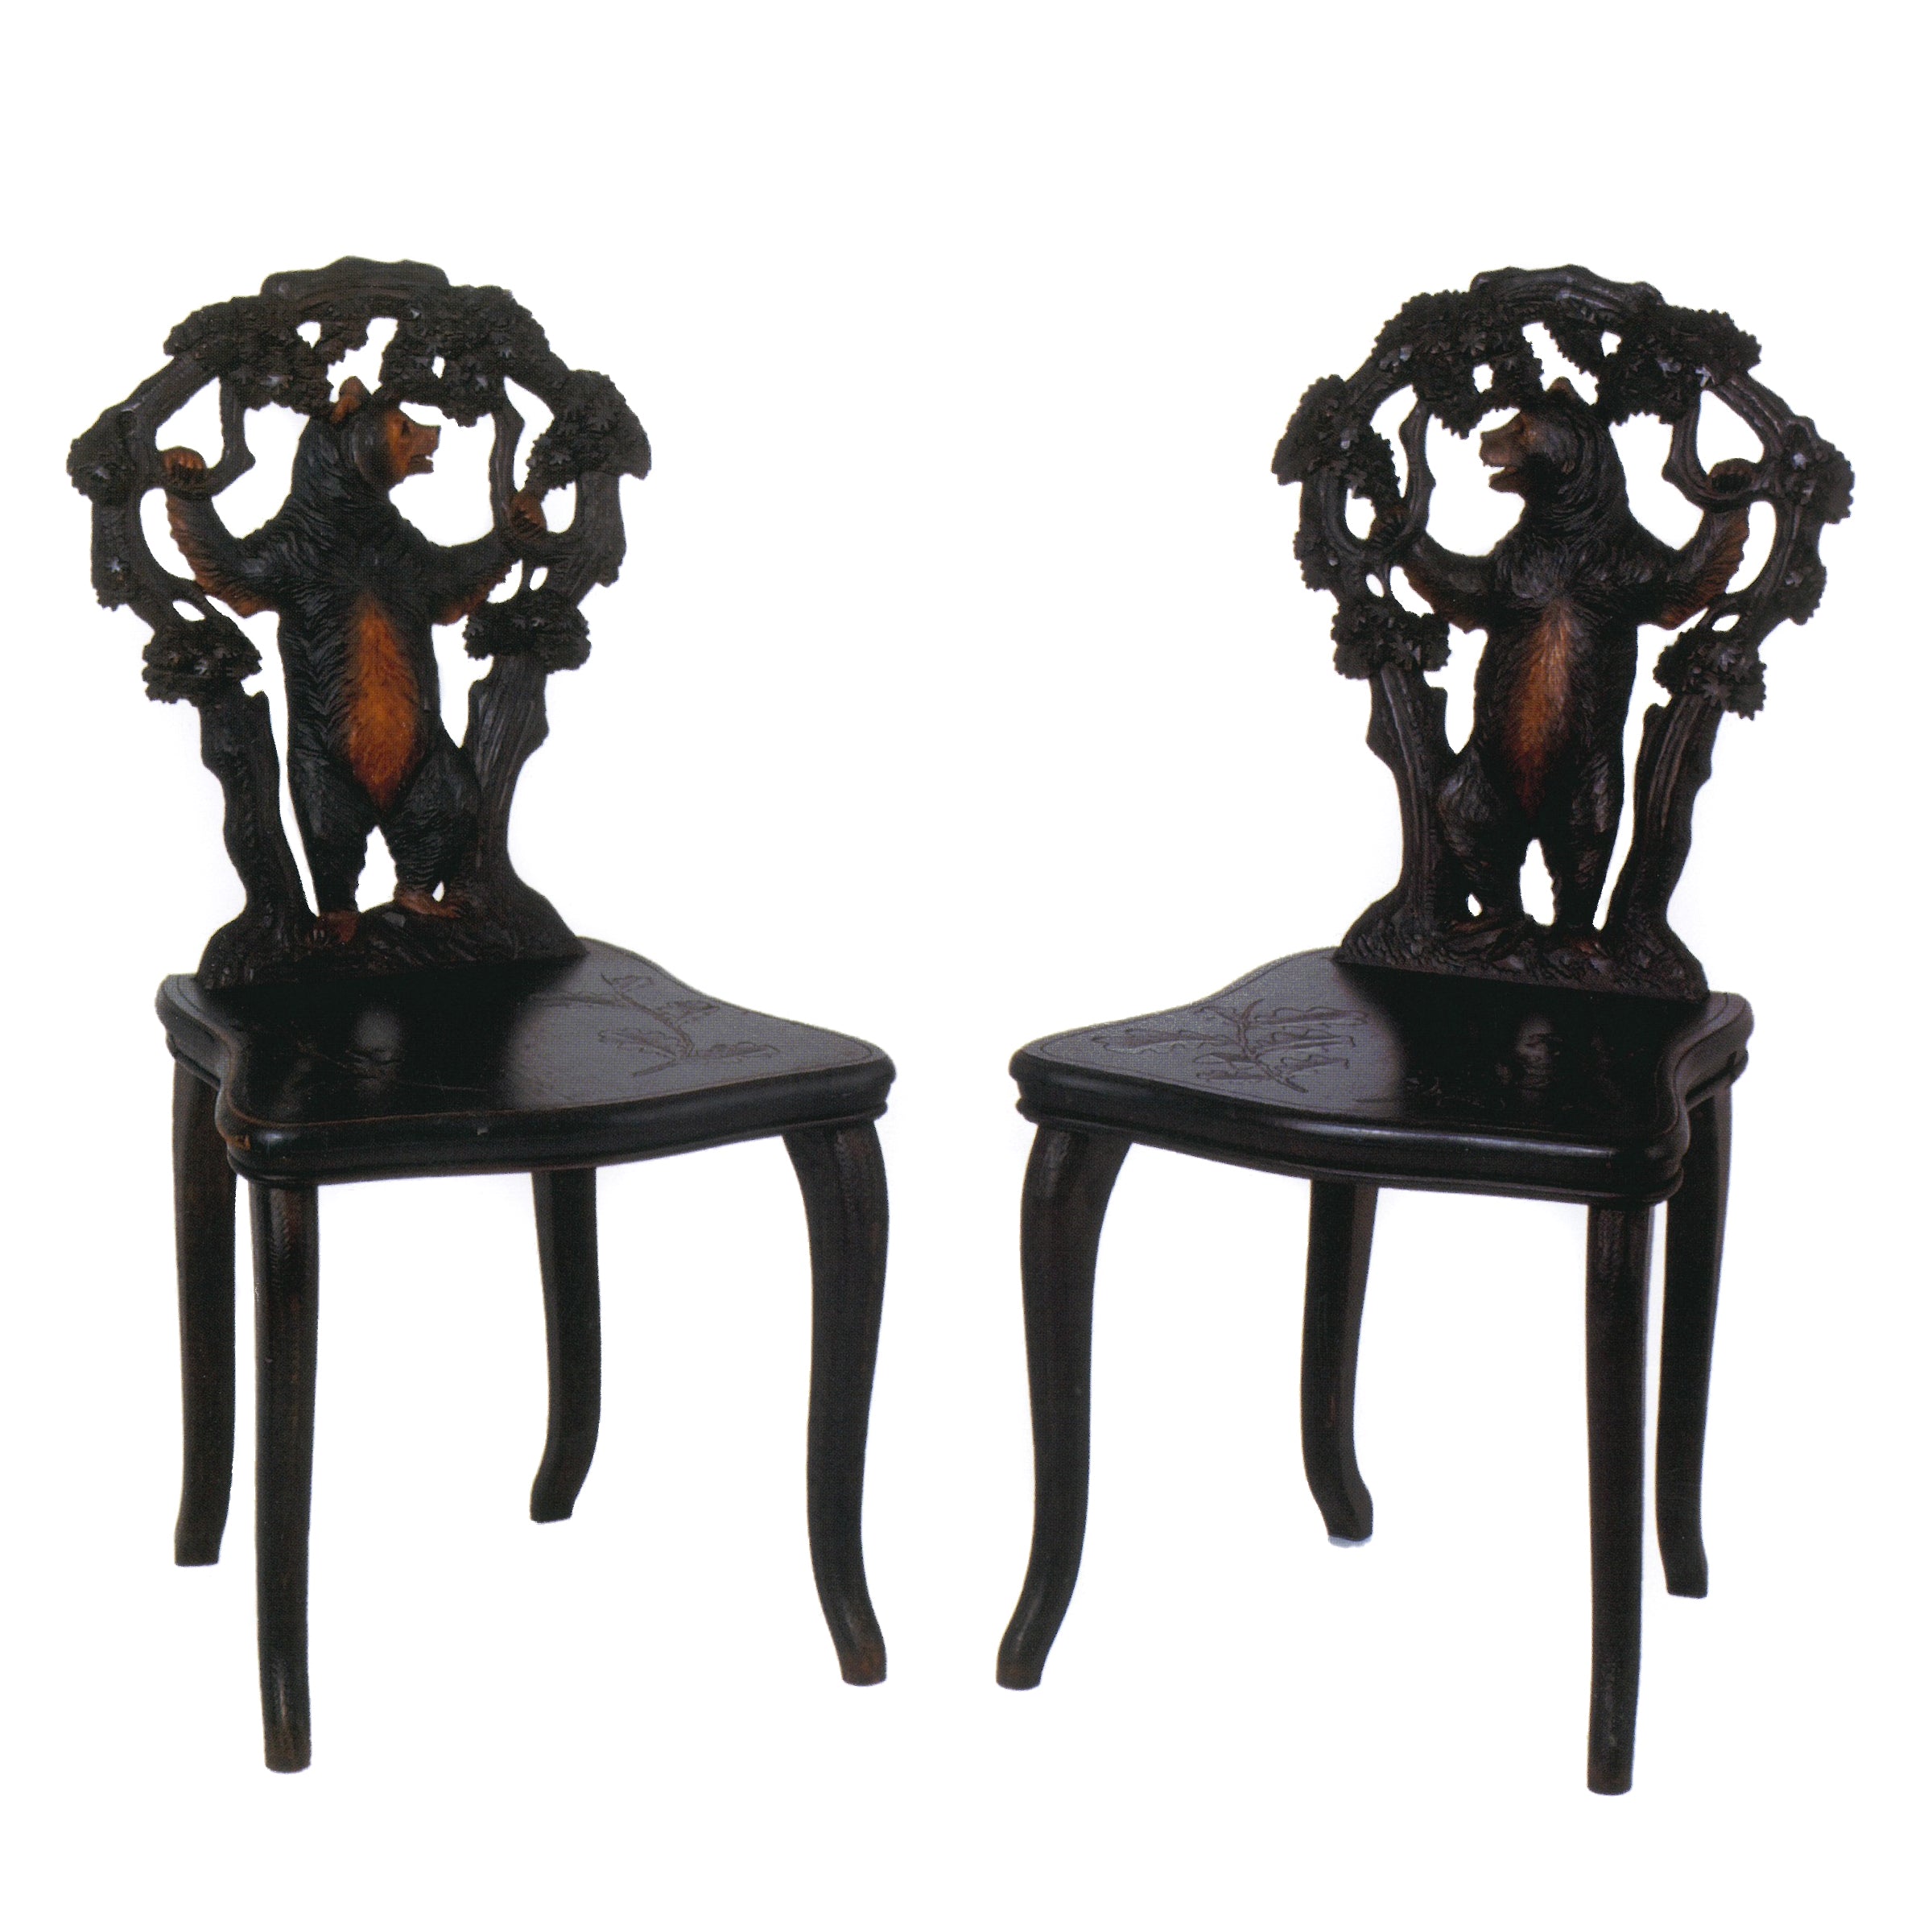 Pair of Black Forest Carved Chairs, Furnishings, Black Forest, Chair